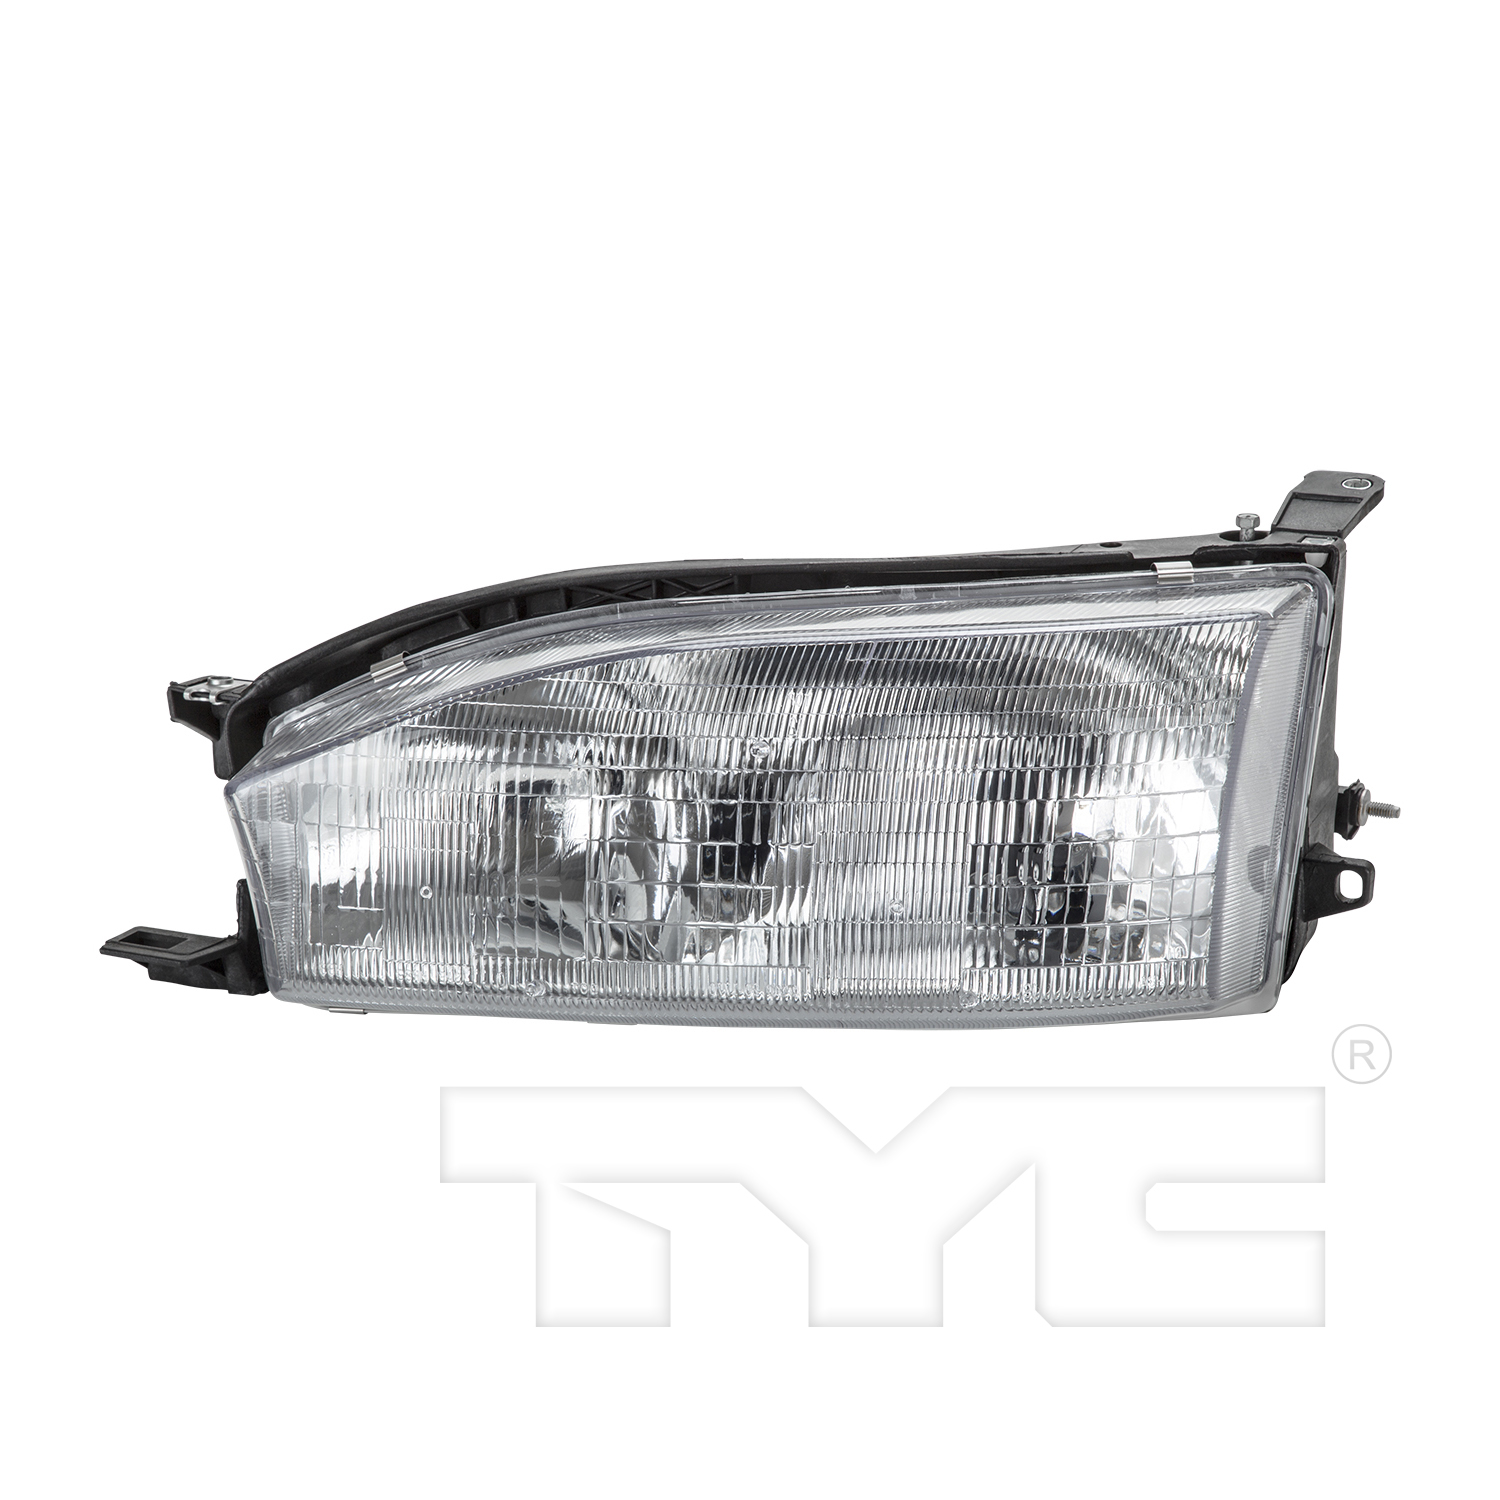 Aftermarket HEADLIGHTS for TOYOTA - CAMRY, CAMRY,92-94,LT Headlamp assy composite